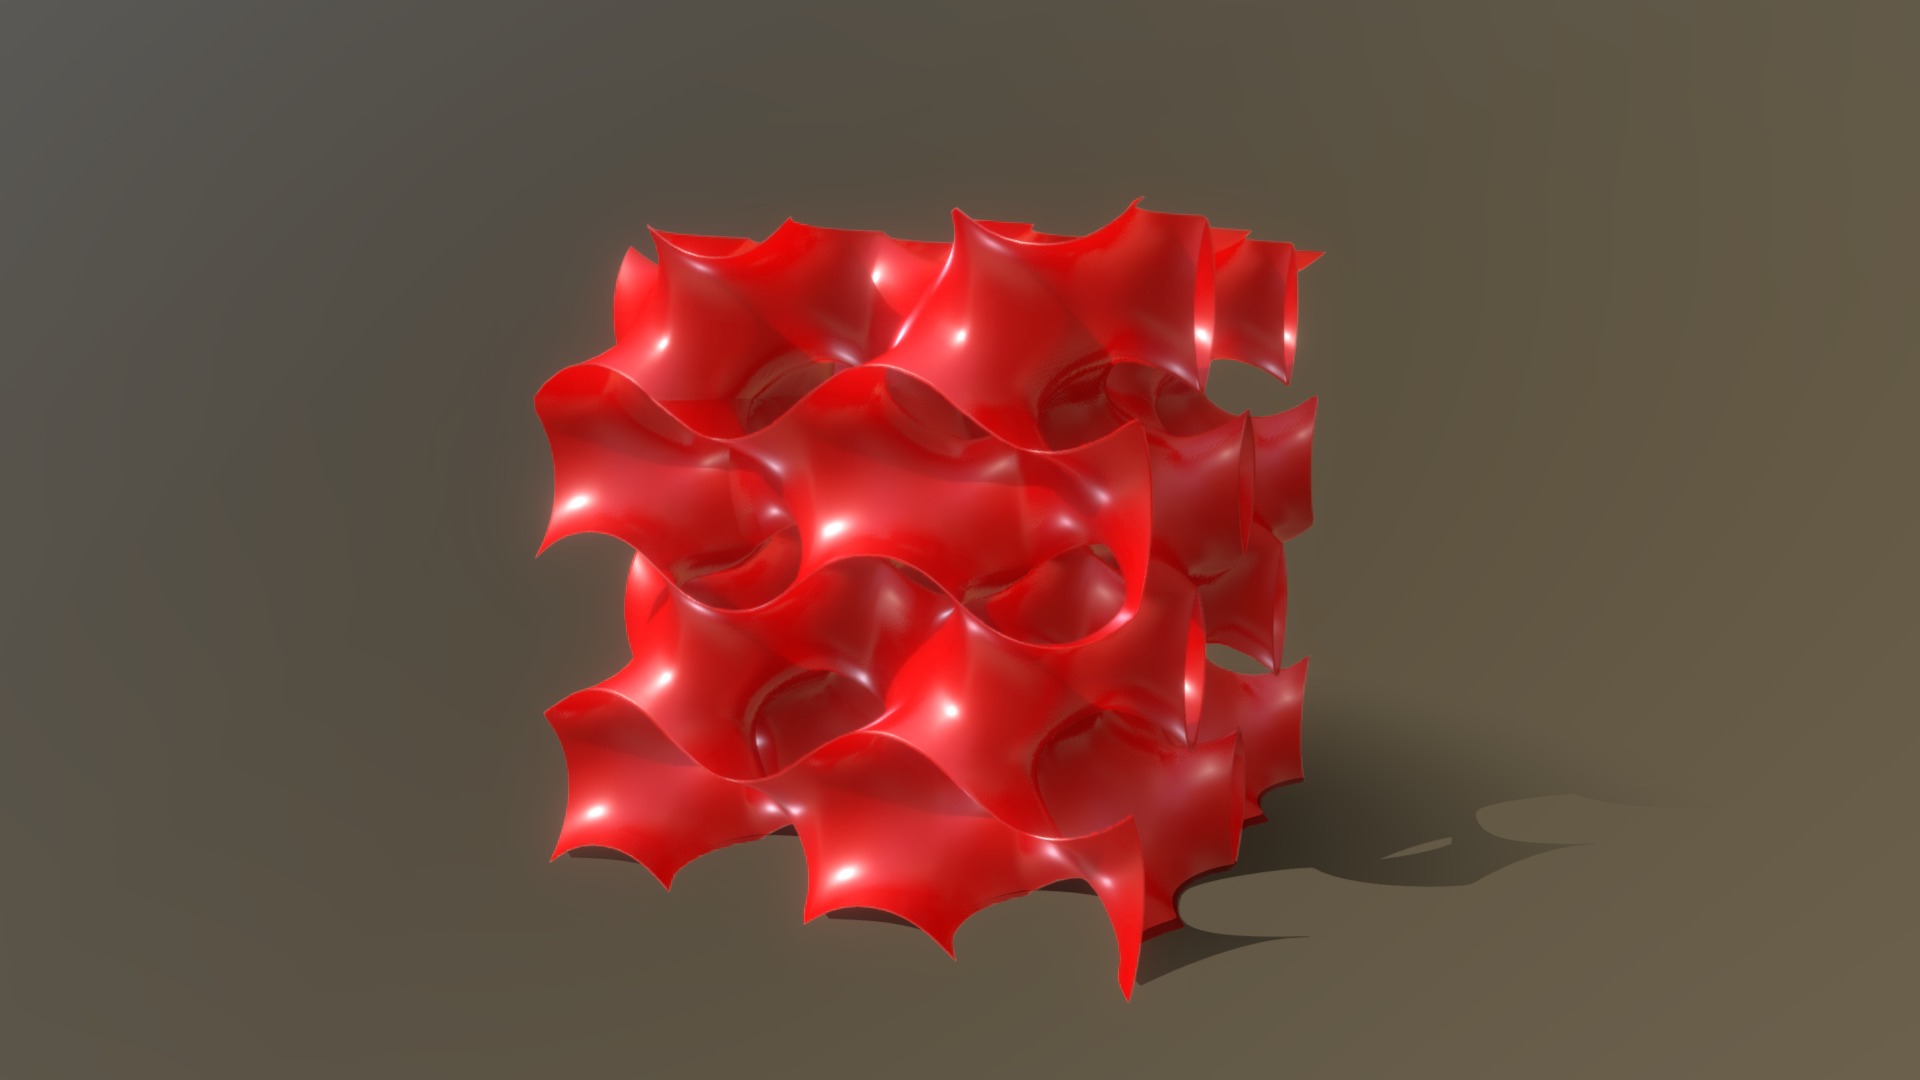 3D model Gyroid Cube - This is a 3D model of the Gyroid Cube. The 3D model is about a red heart shaped object.